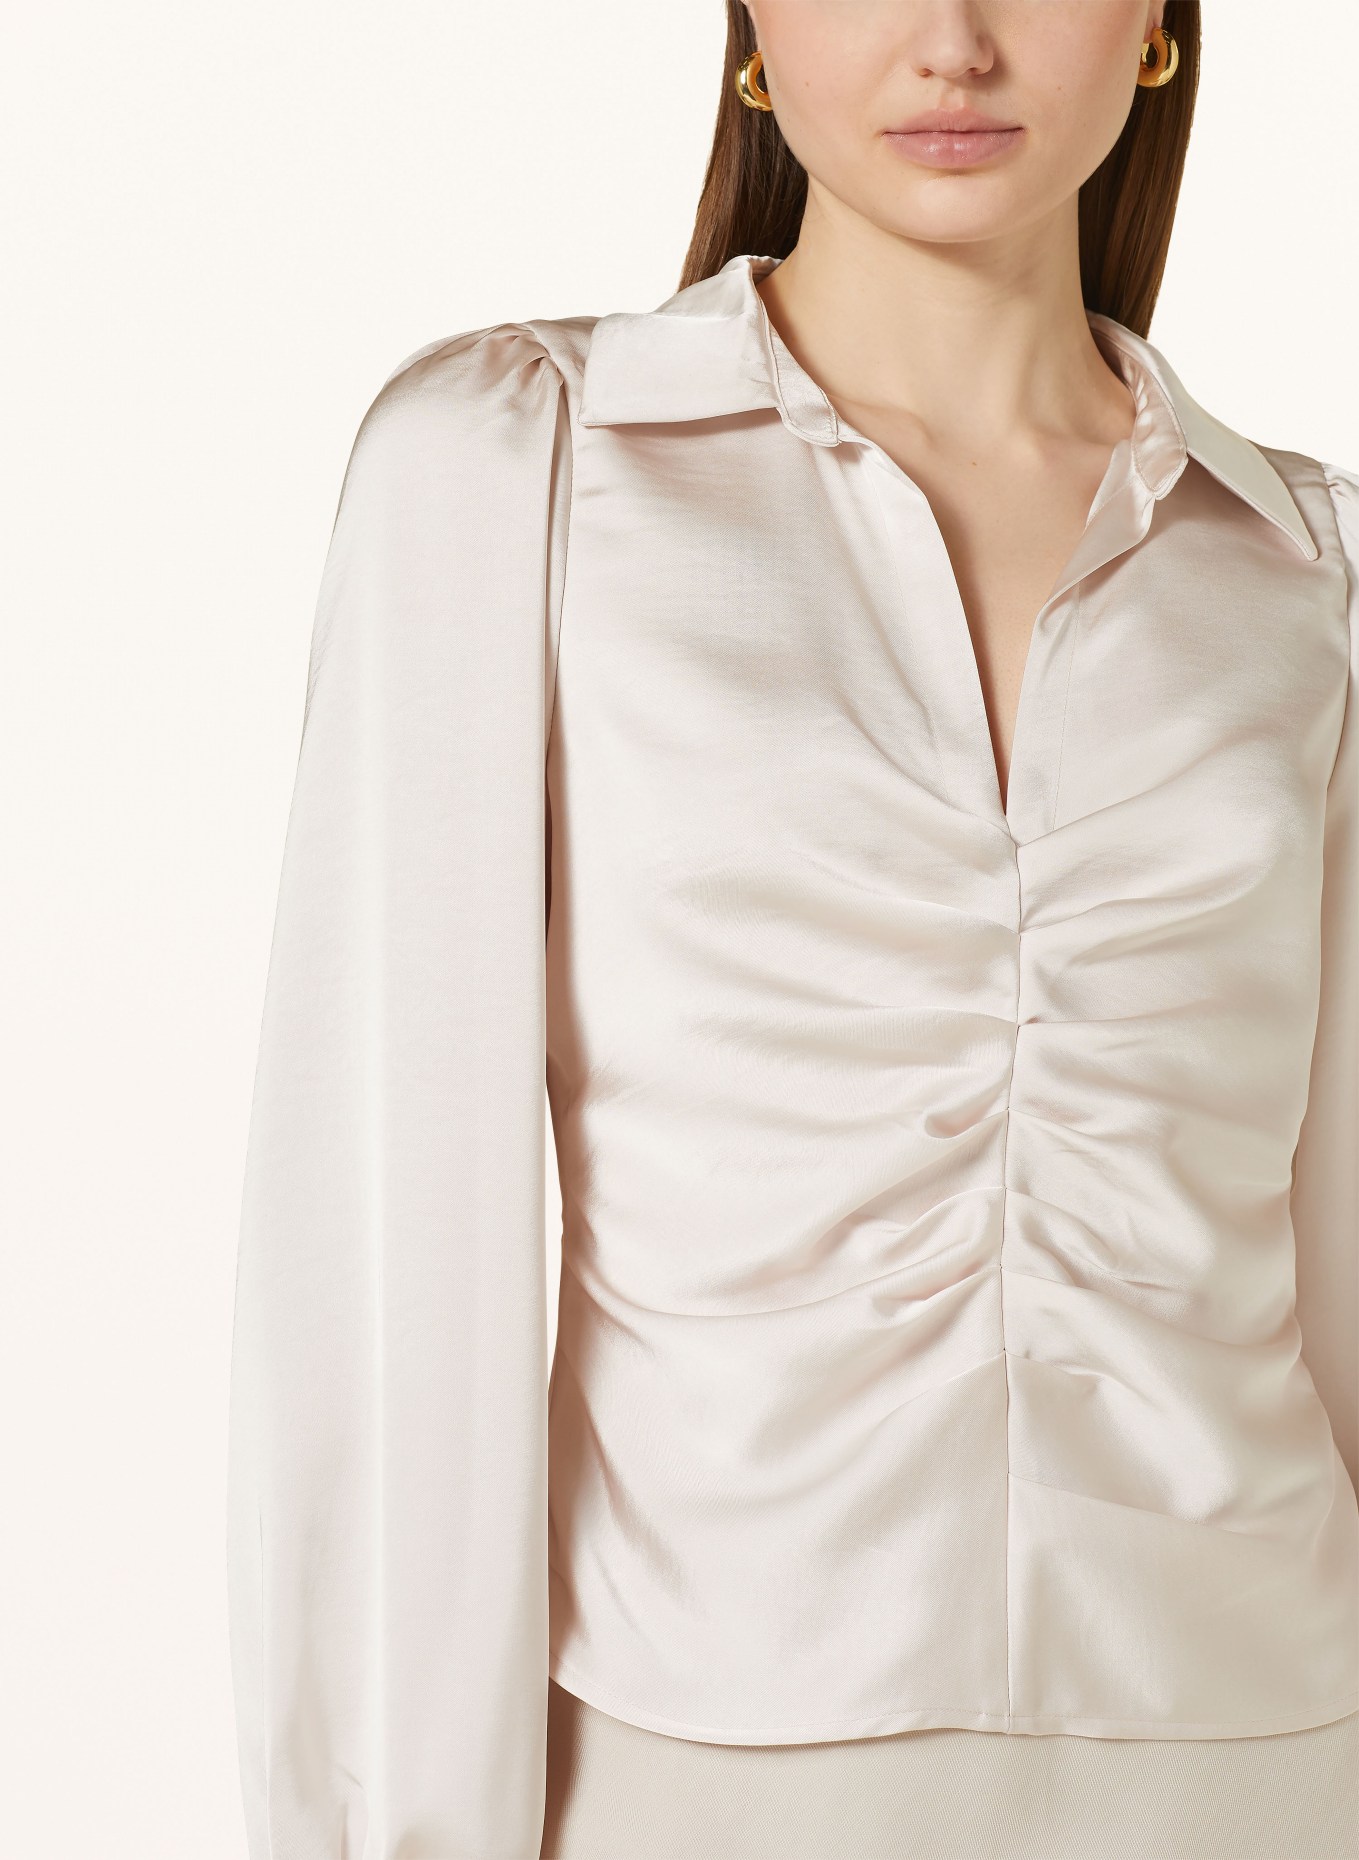 NEO NOIR Shirt blouse MILLE made of satin, Color: CREAM (Image 4)